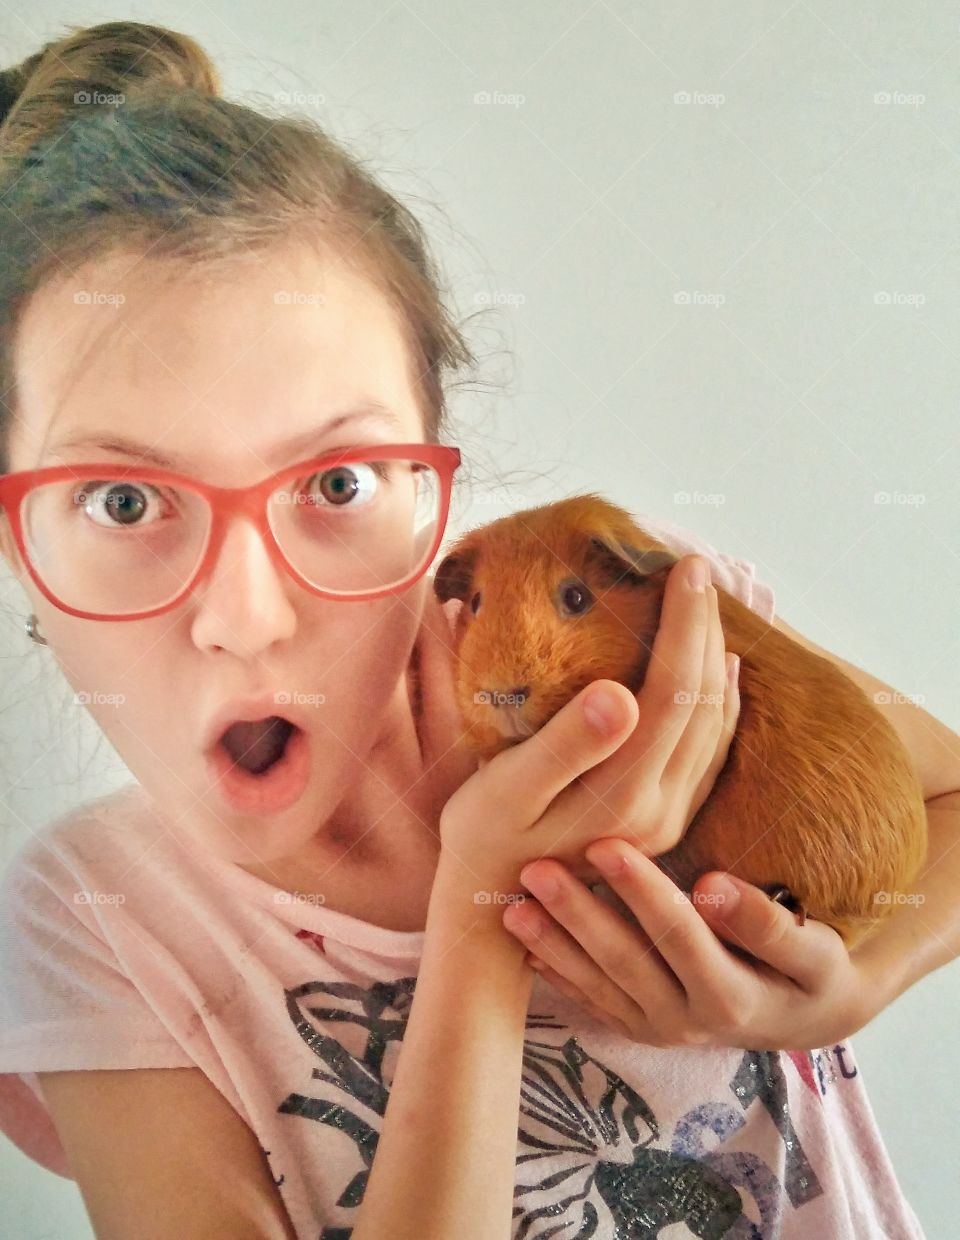 Wow! What a surprise! Girlanda And guineapig